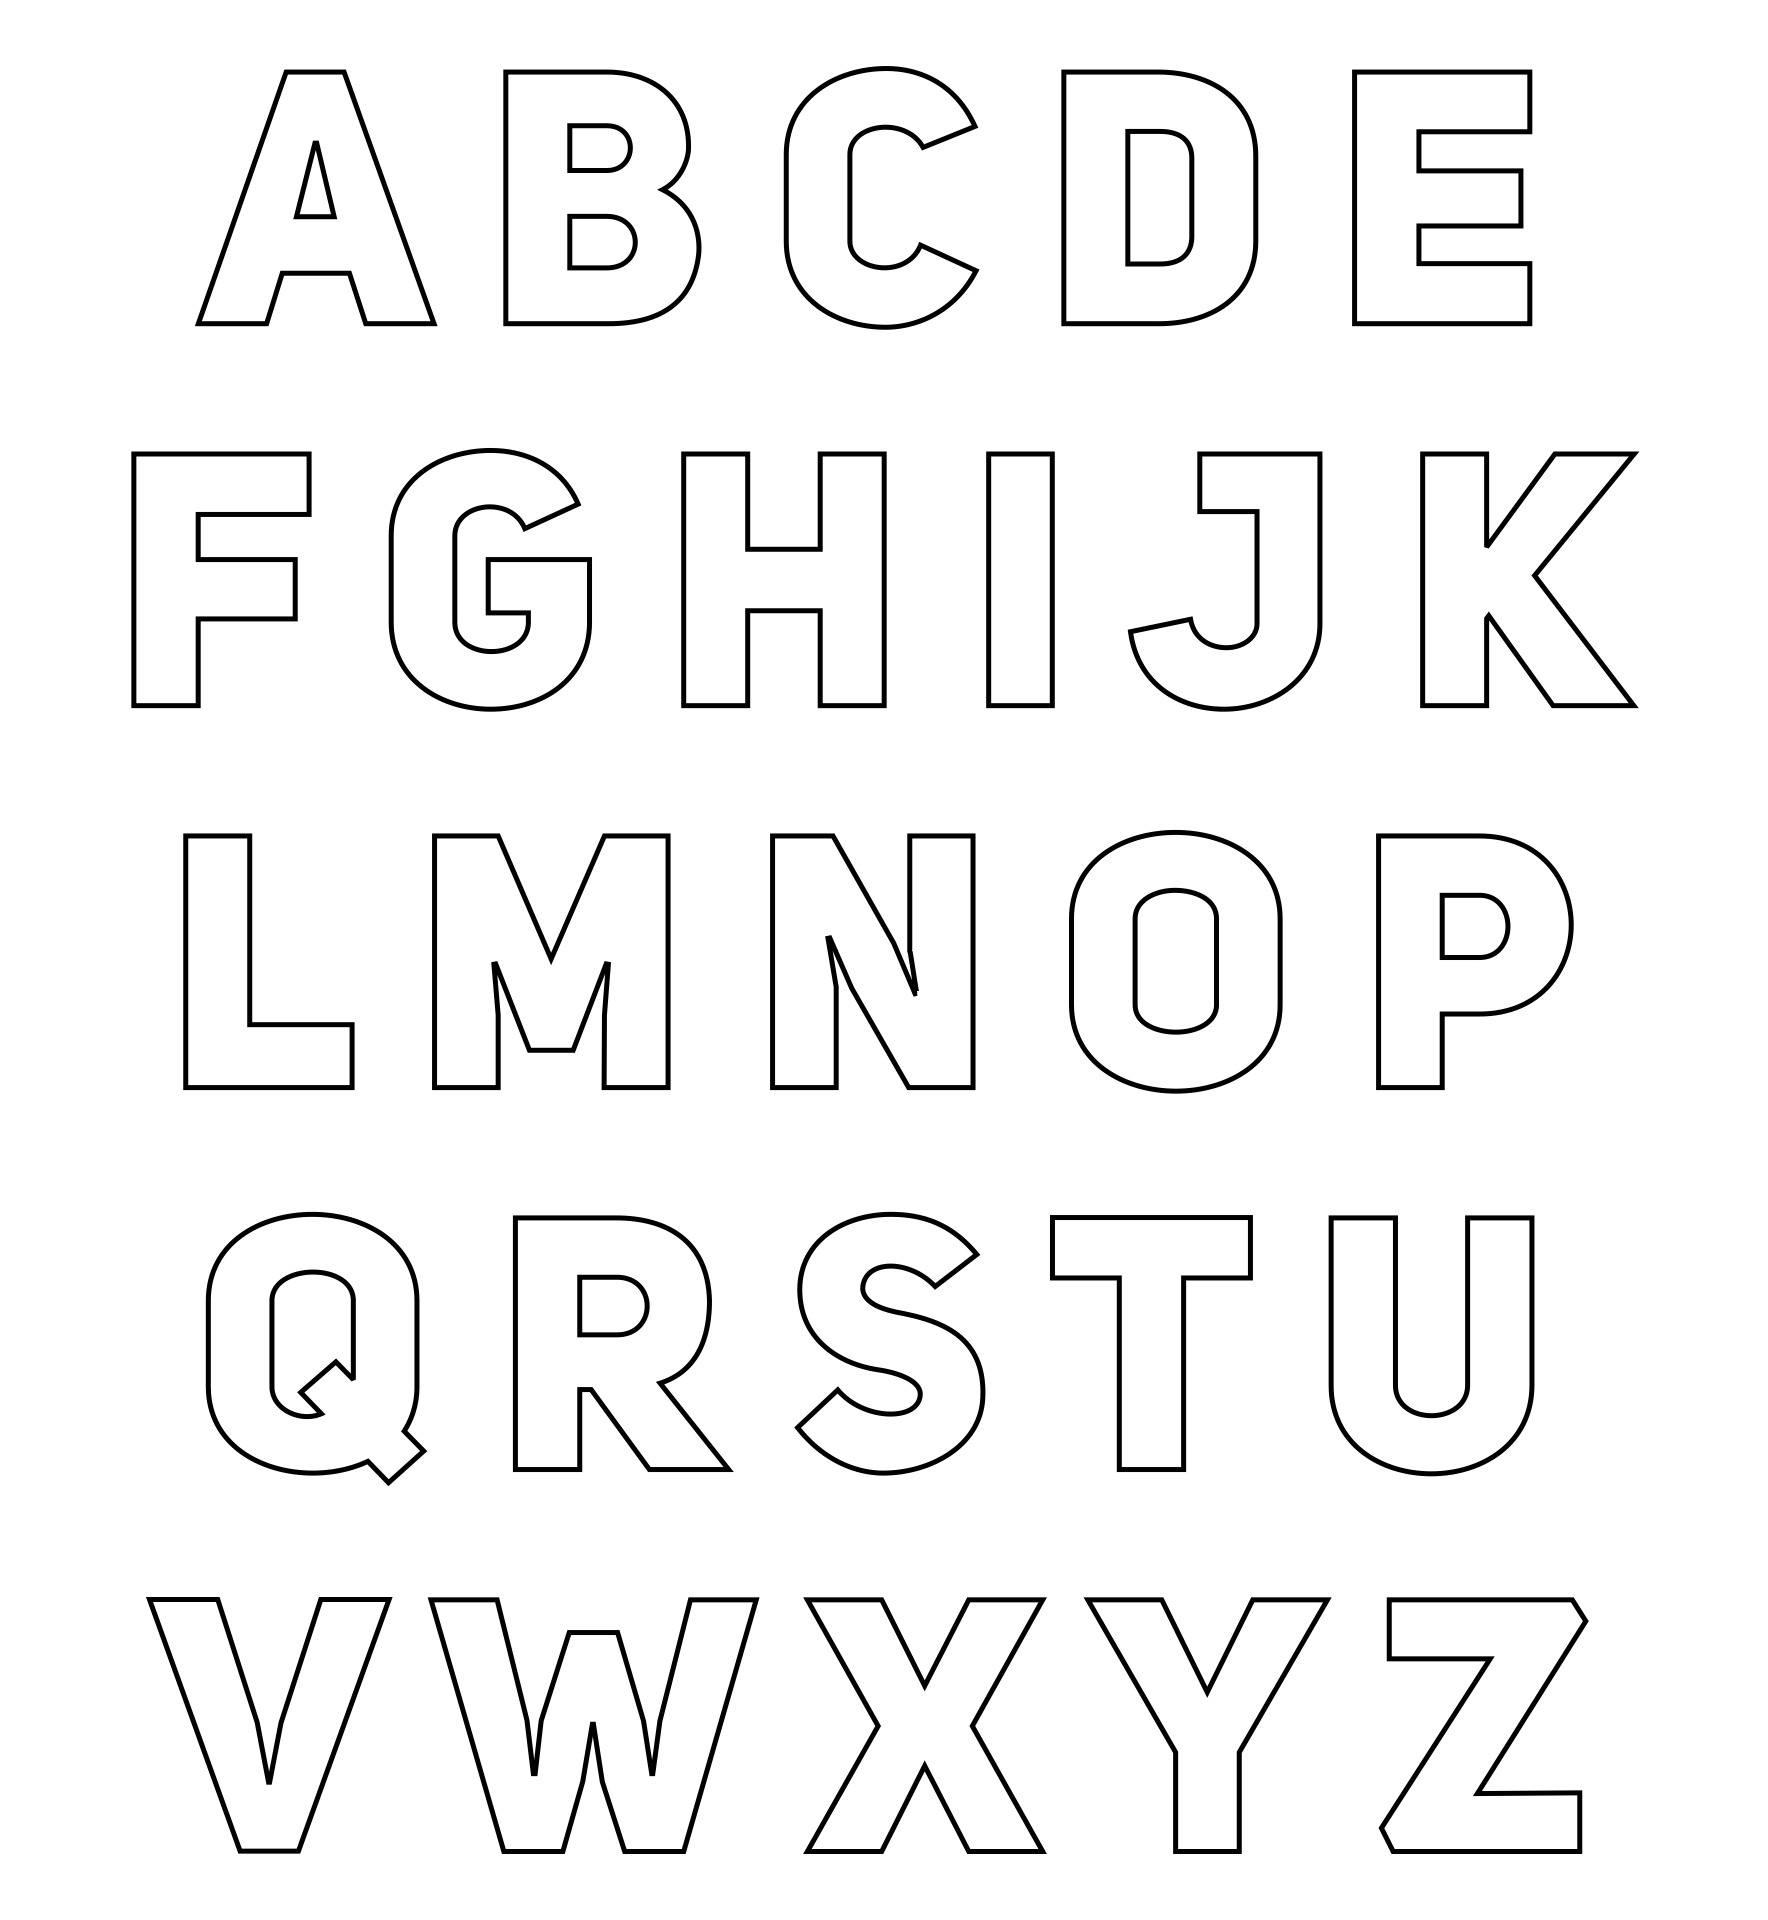 Cut Out Free Printable Bulletin Board Letters Templates - Printables ...